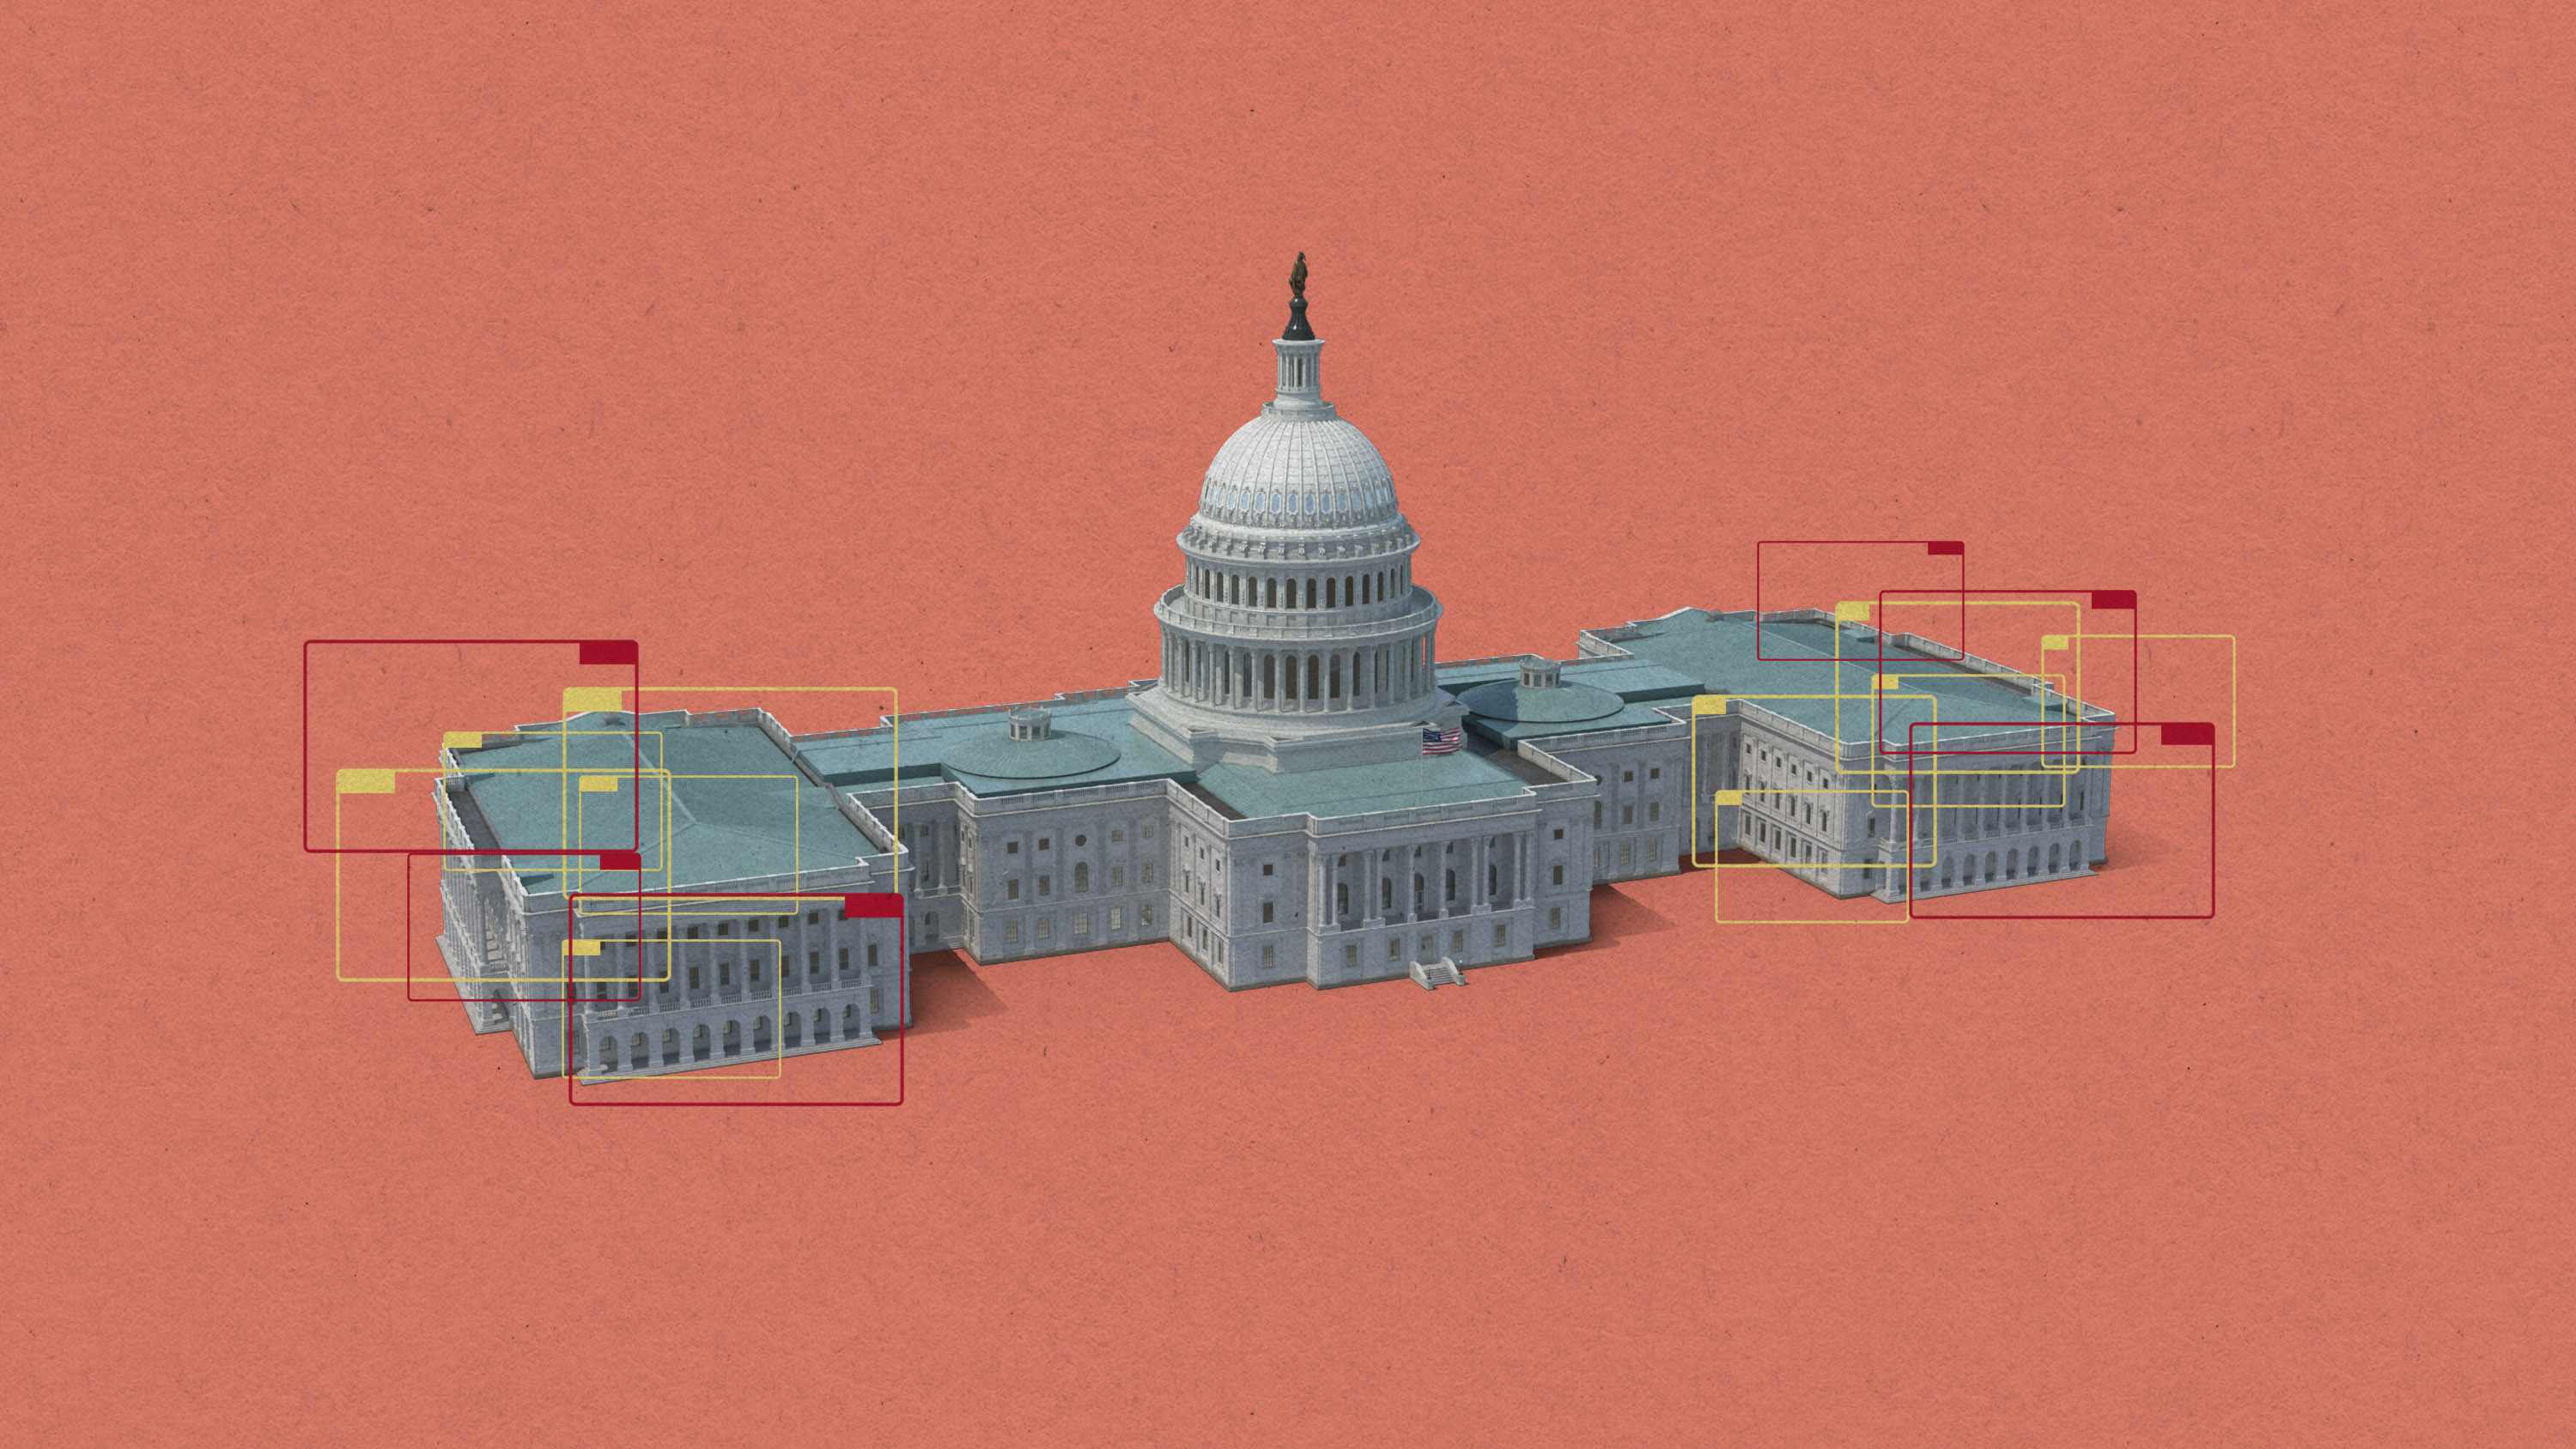 The US Capitol building with the wings annotated by yellow and red rectangles